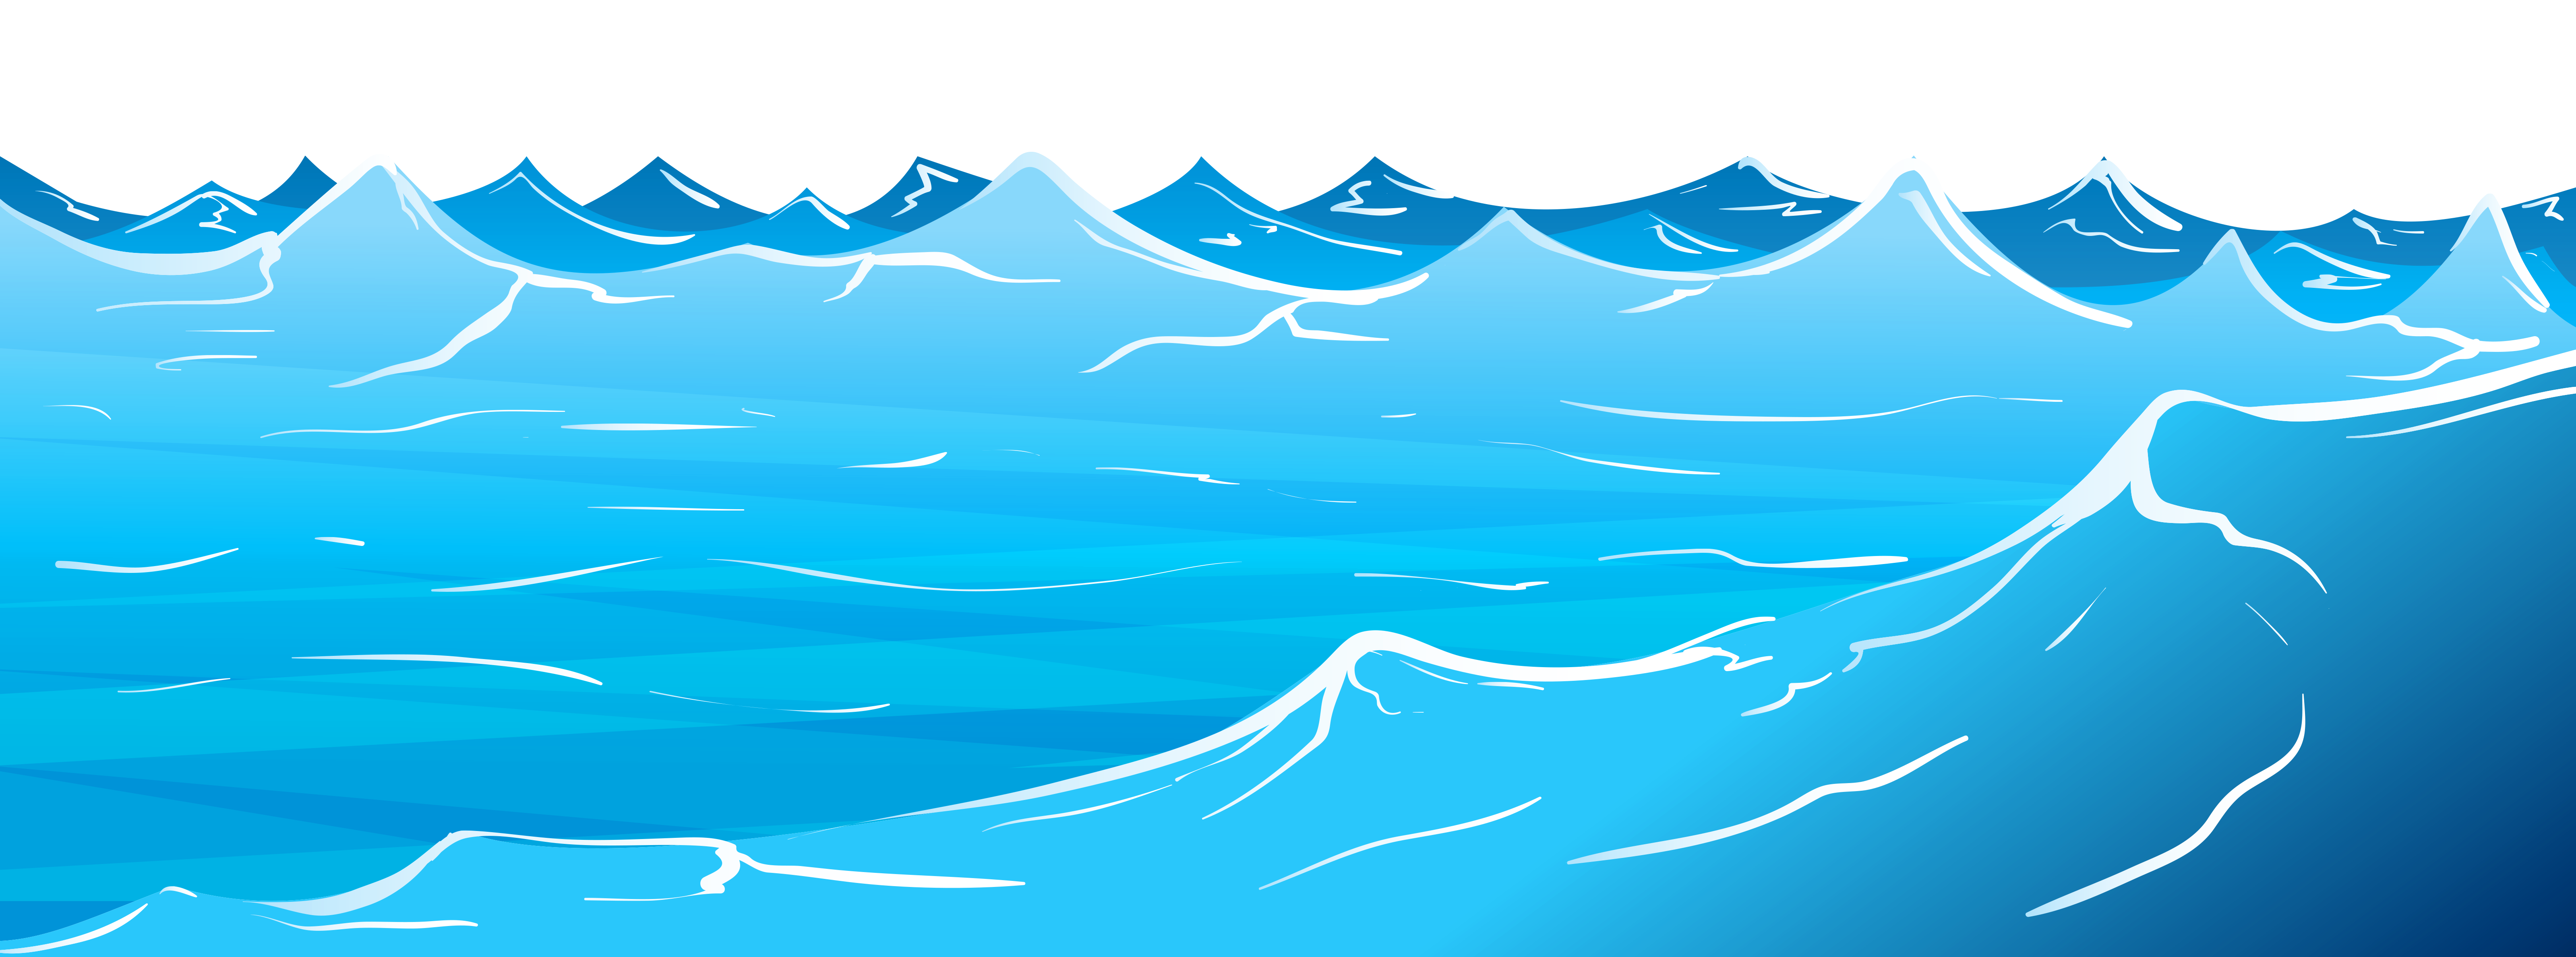 Water waves clipart free clipart image 